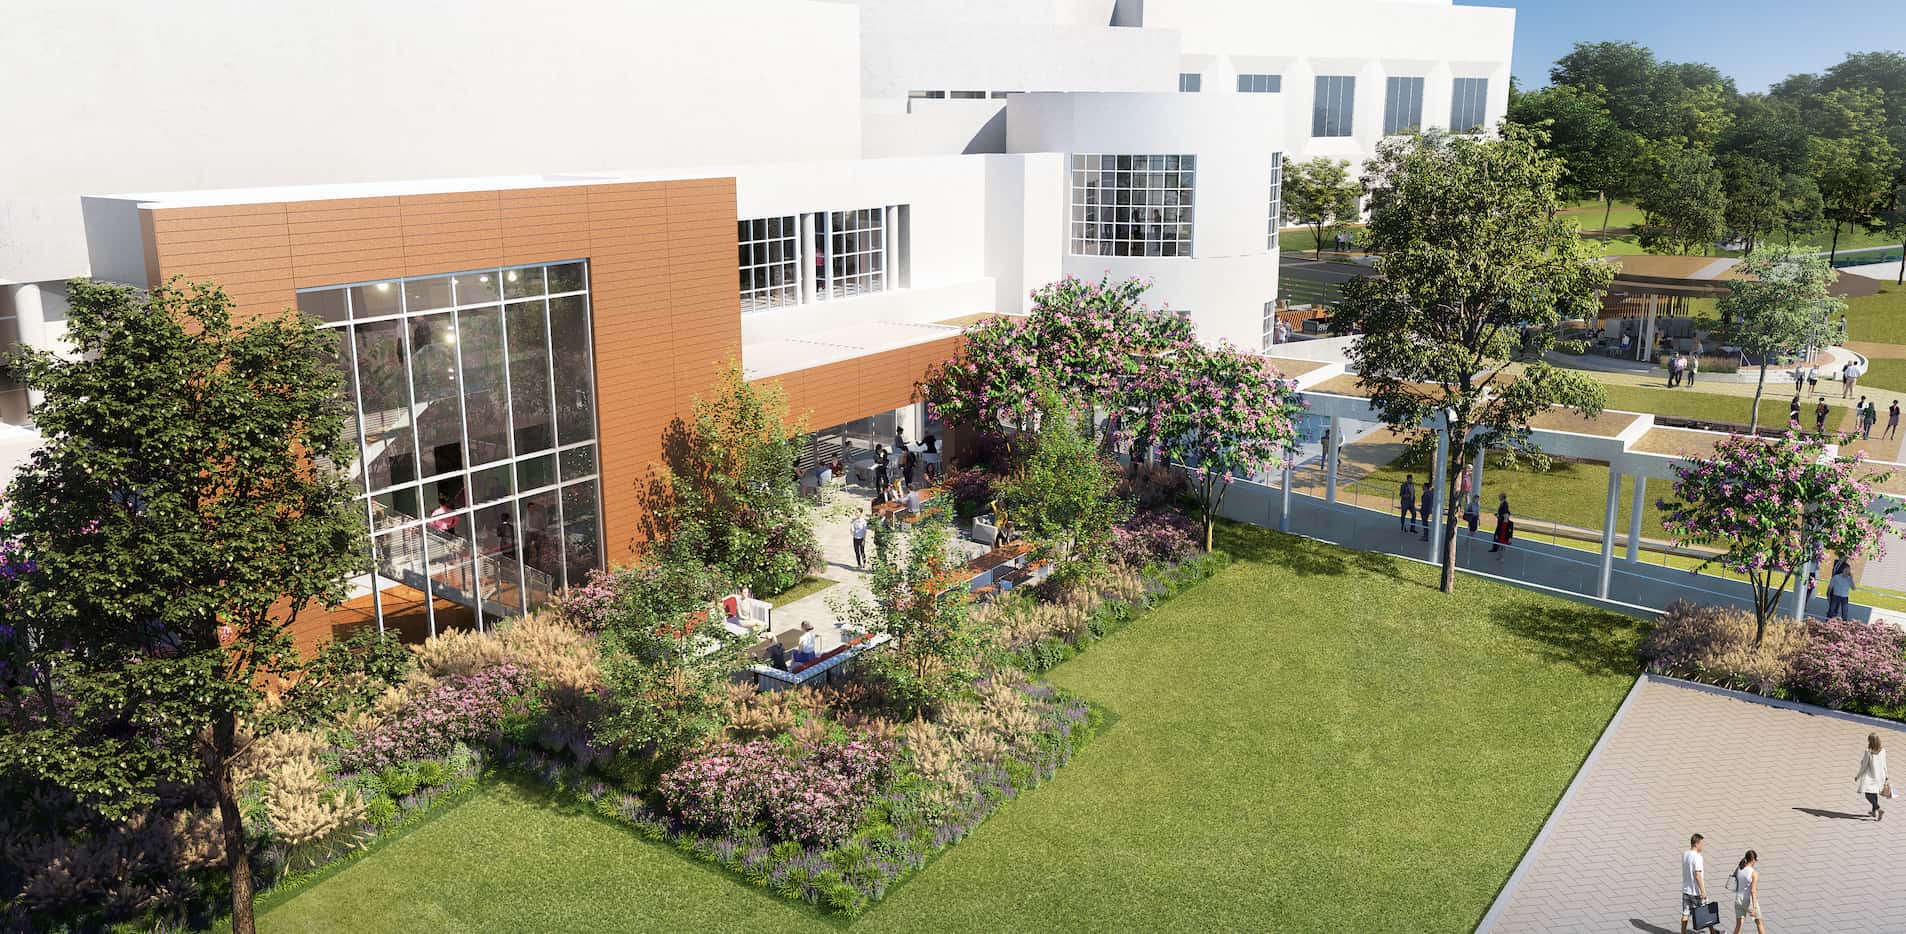 GlenStar plans to add new outdoor space to the Solana campus.